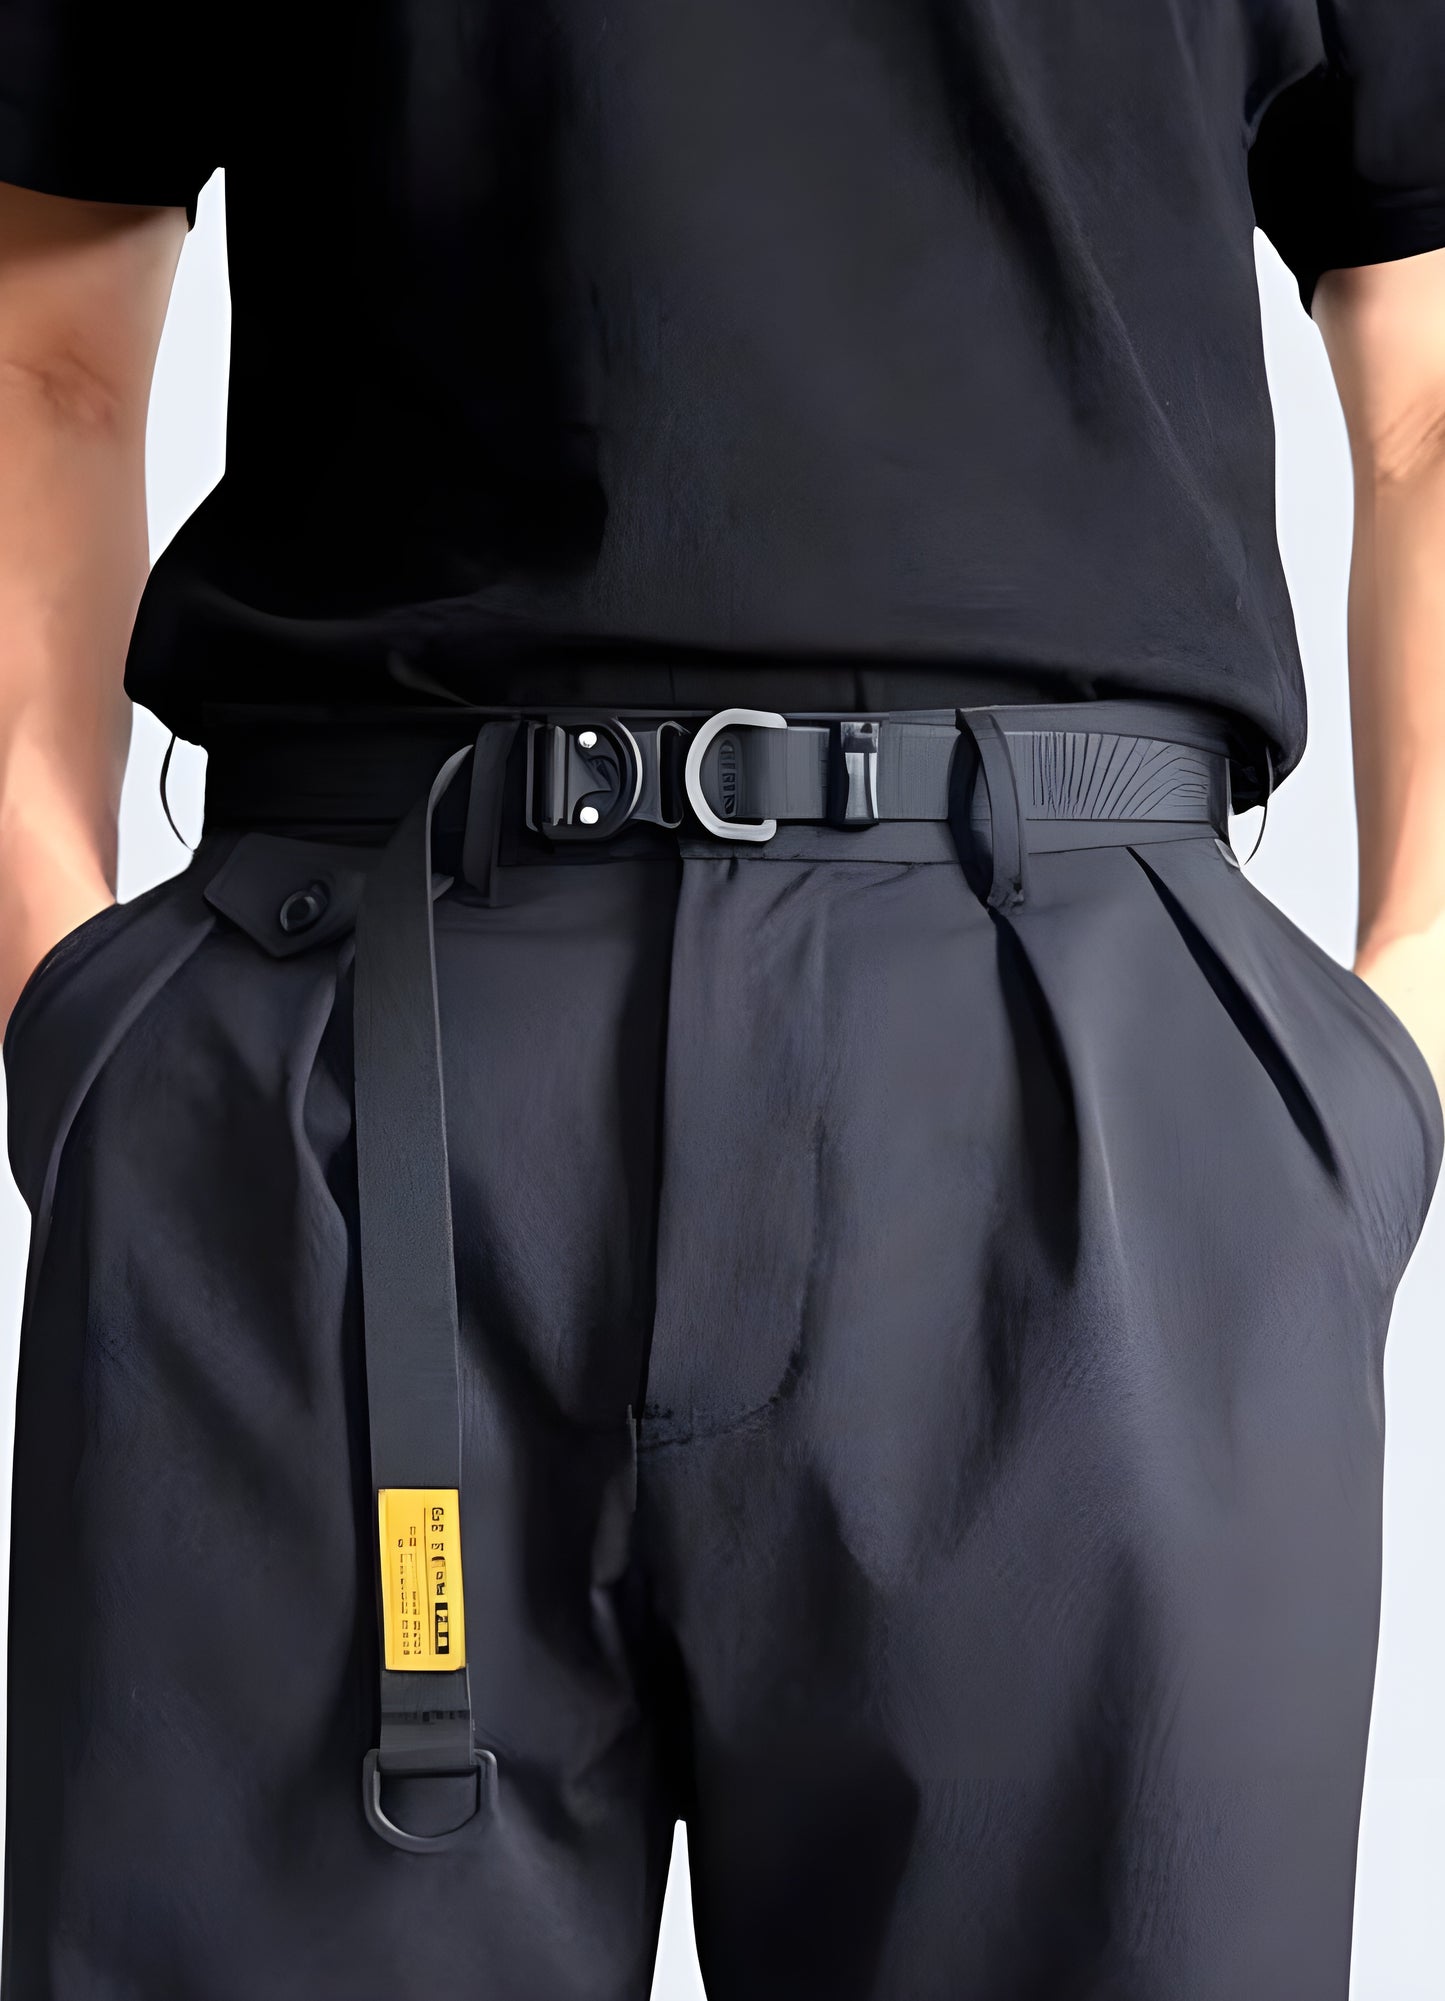 The belt's robust construction ensures it stands up to the rigors of everyday wear while maintaining a sleek profile.